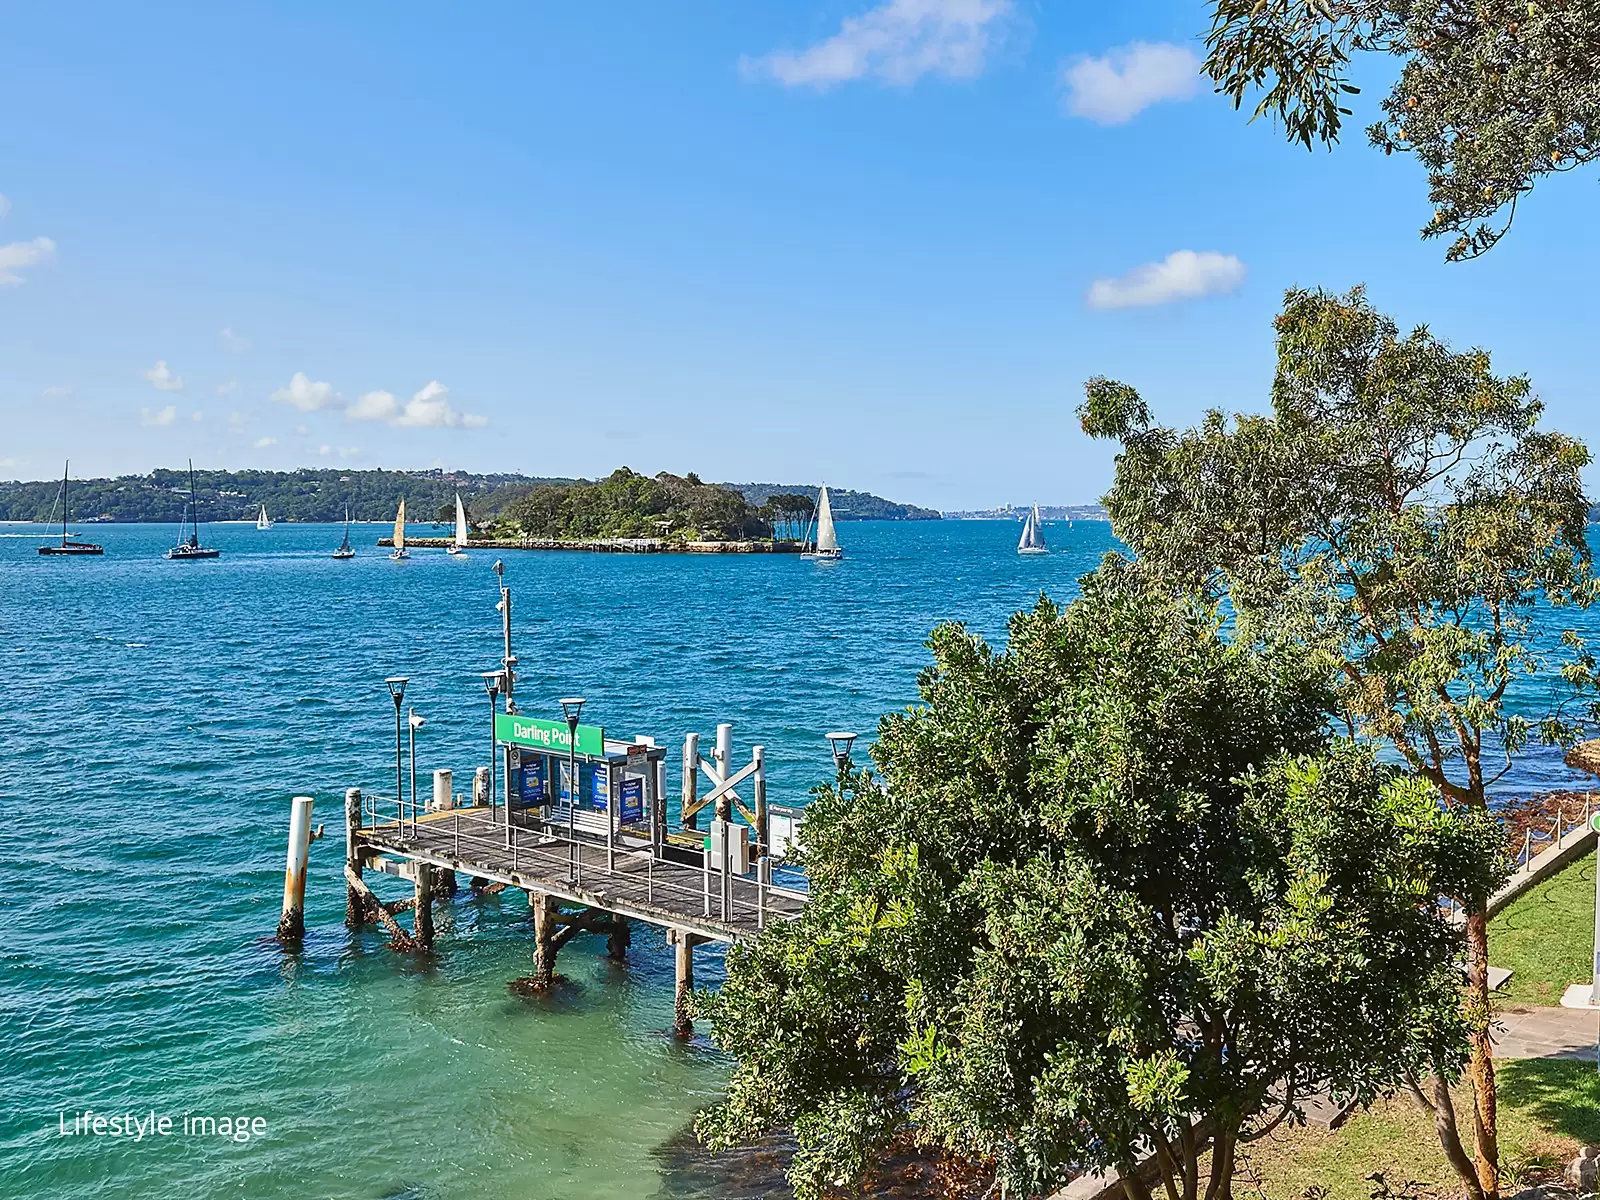 Photo #18: 4/1A Eastbourne Road, Darling Point - Sold by Sydney Sotheby's International Realty